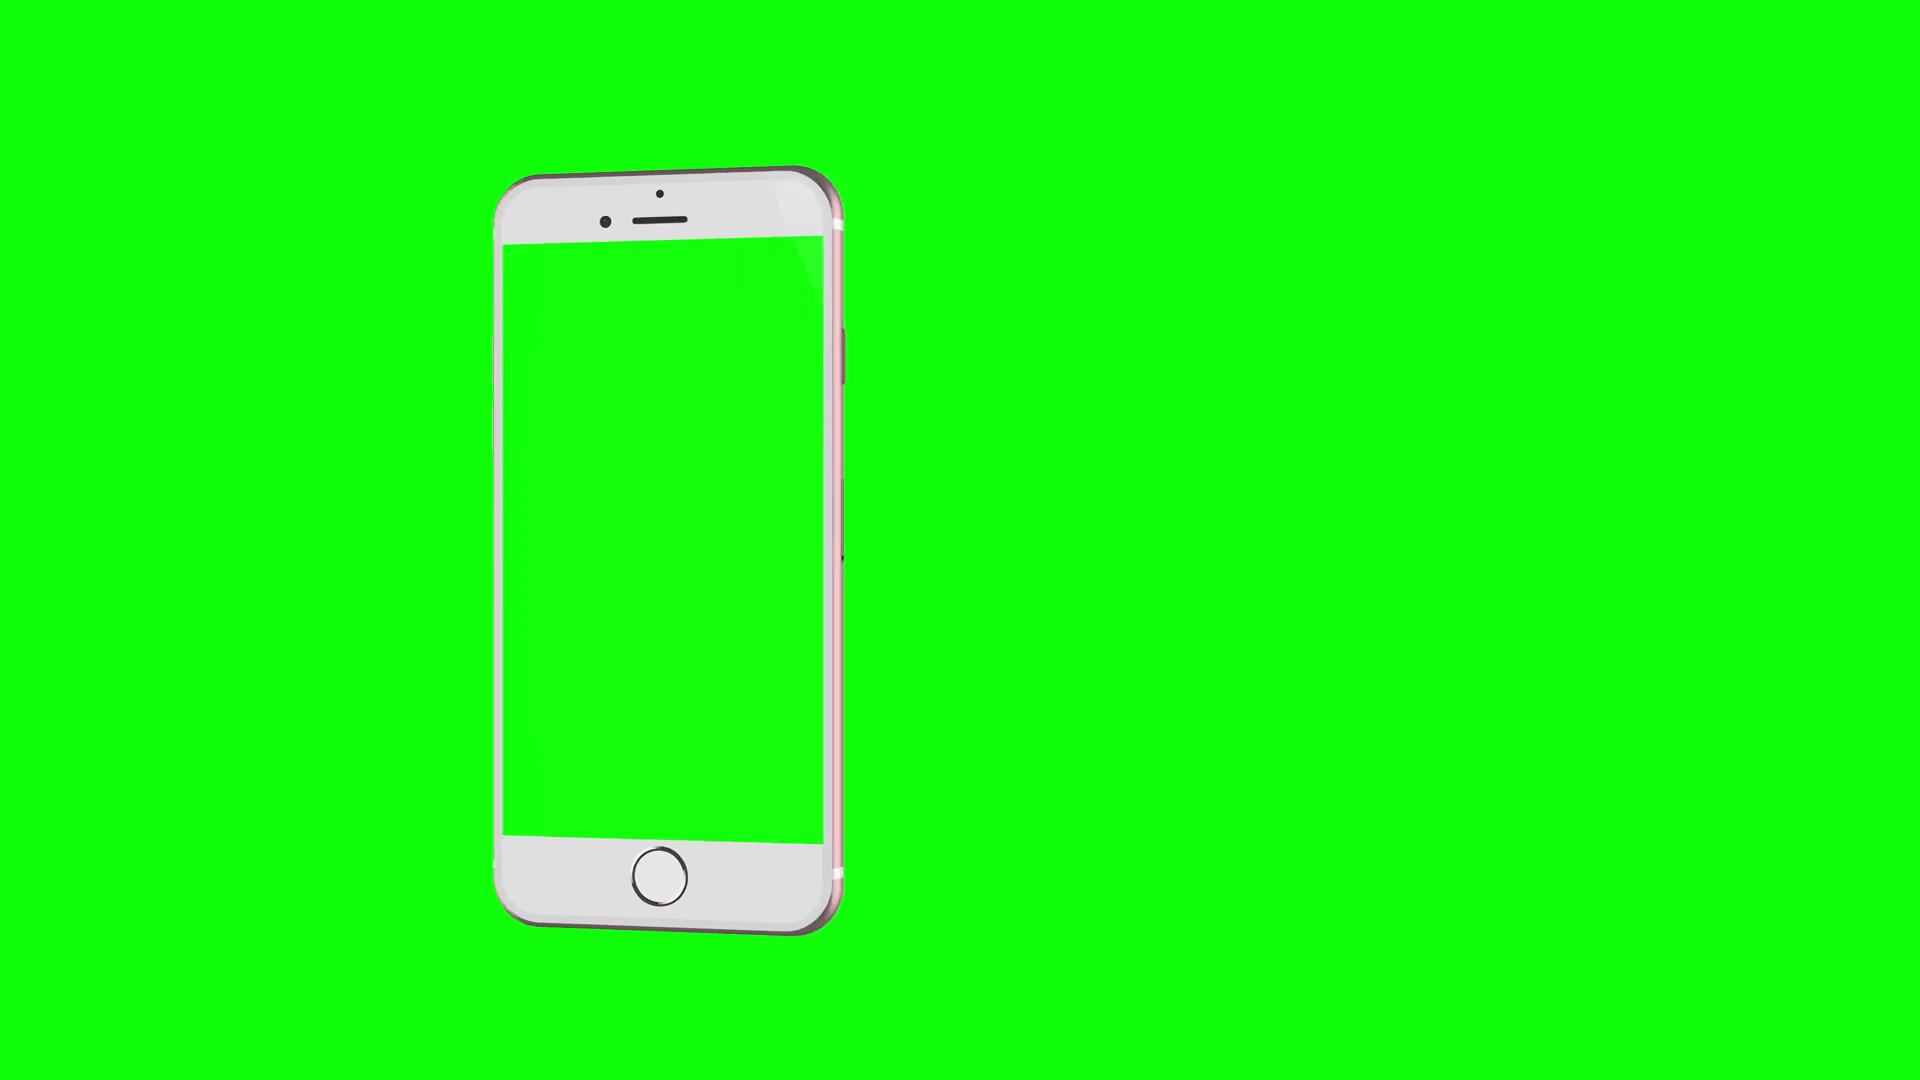 Rose Gold cell phone rotating, with green screen background